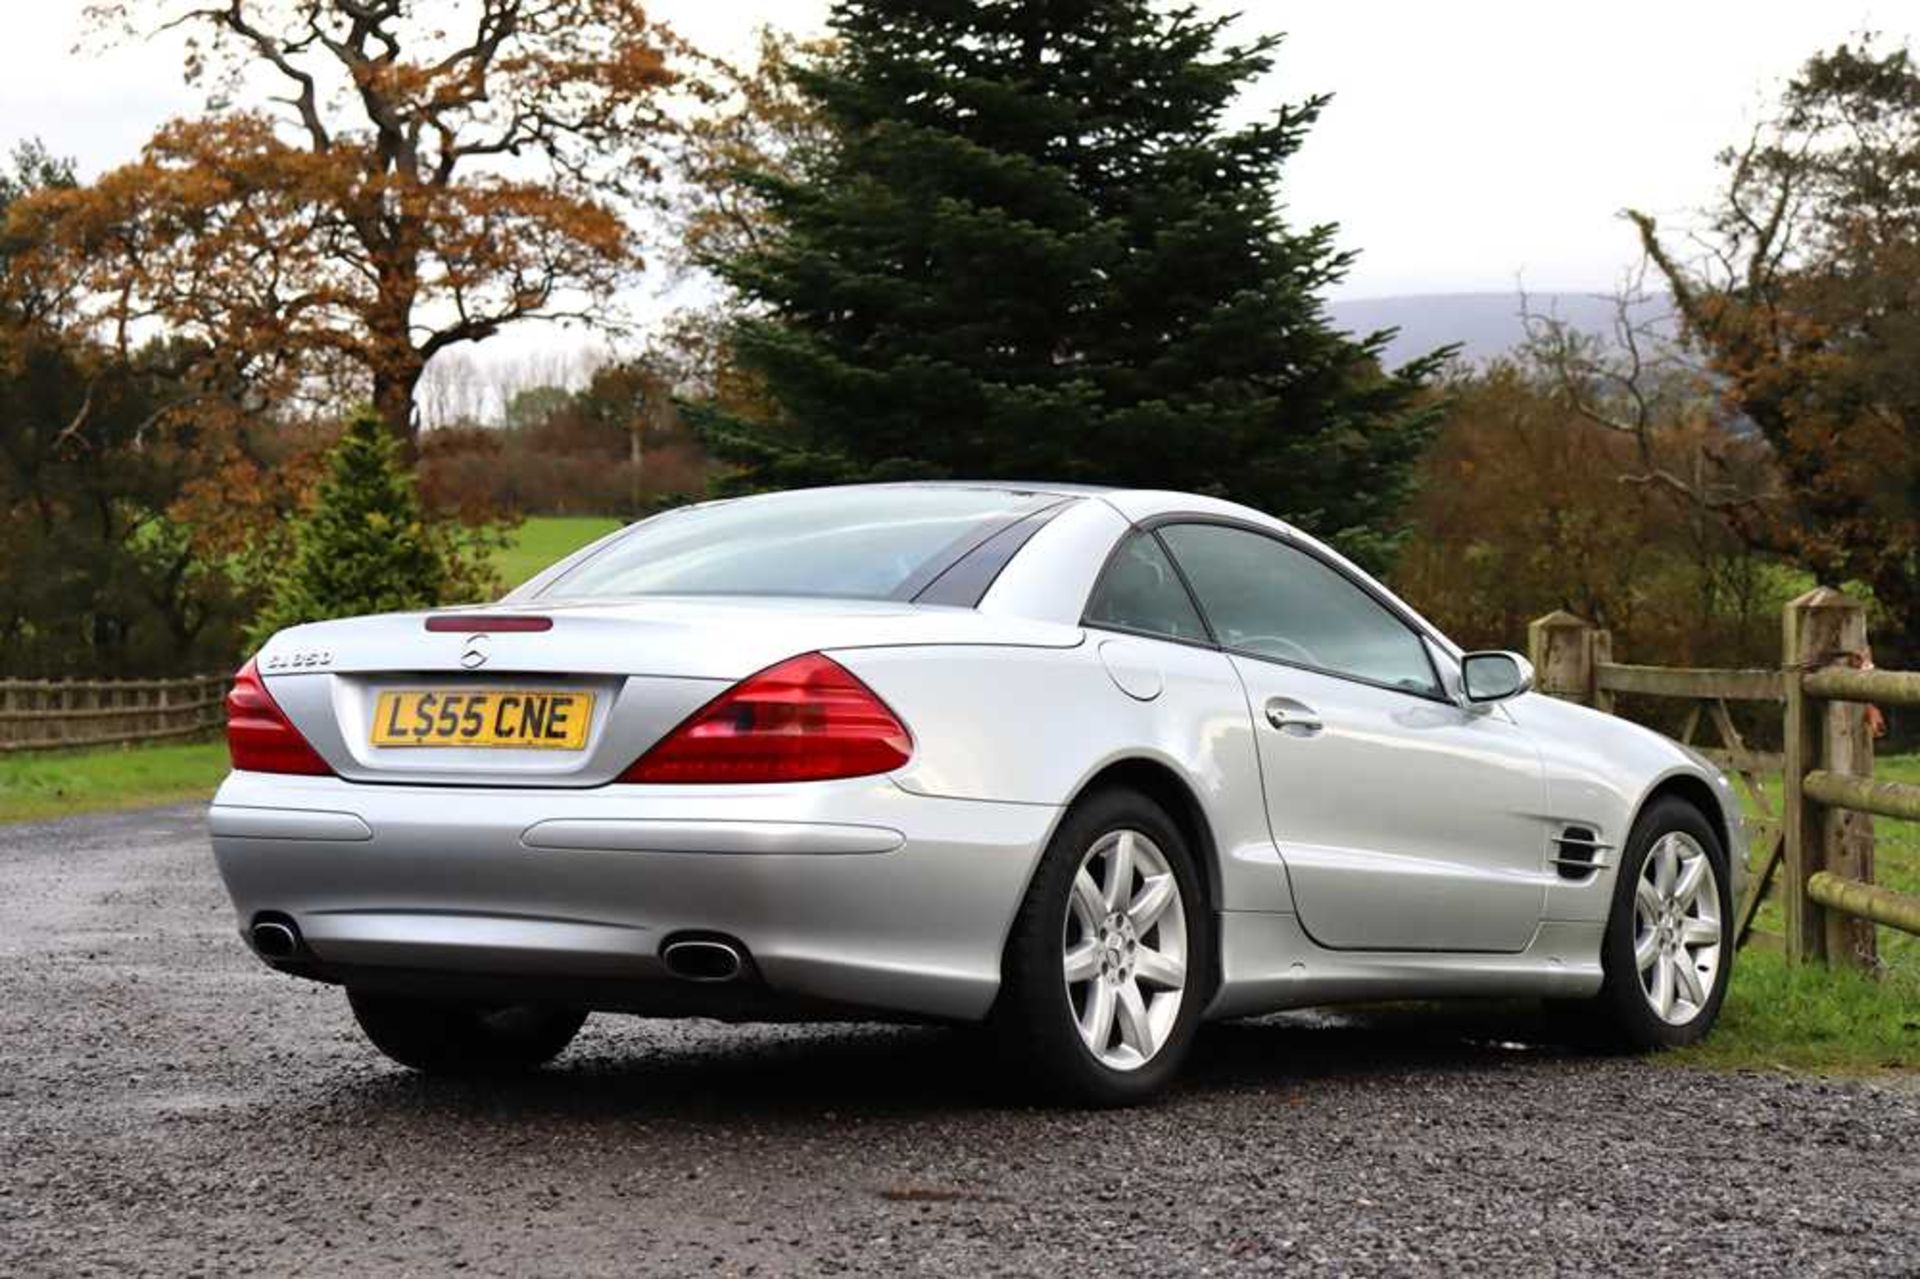 2005 Mercedes-Benz SL 350 Just 34,800 miles from new - Image 15 of 75